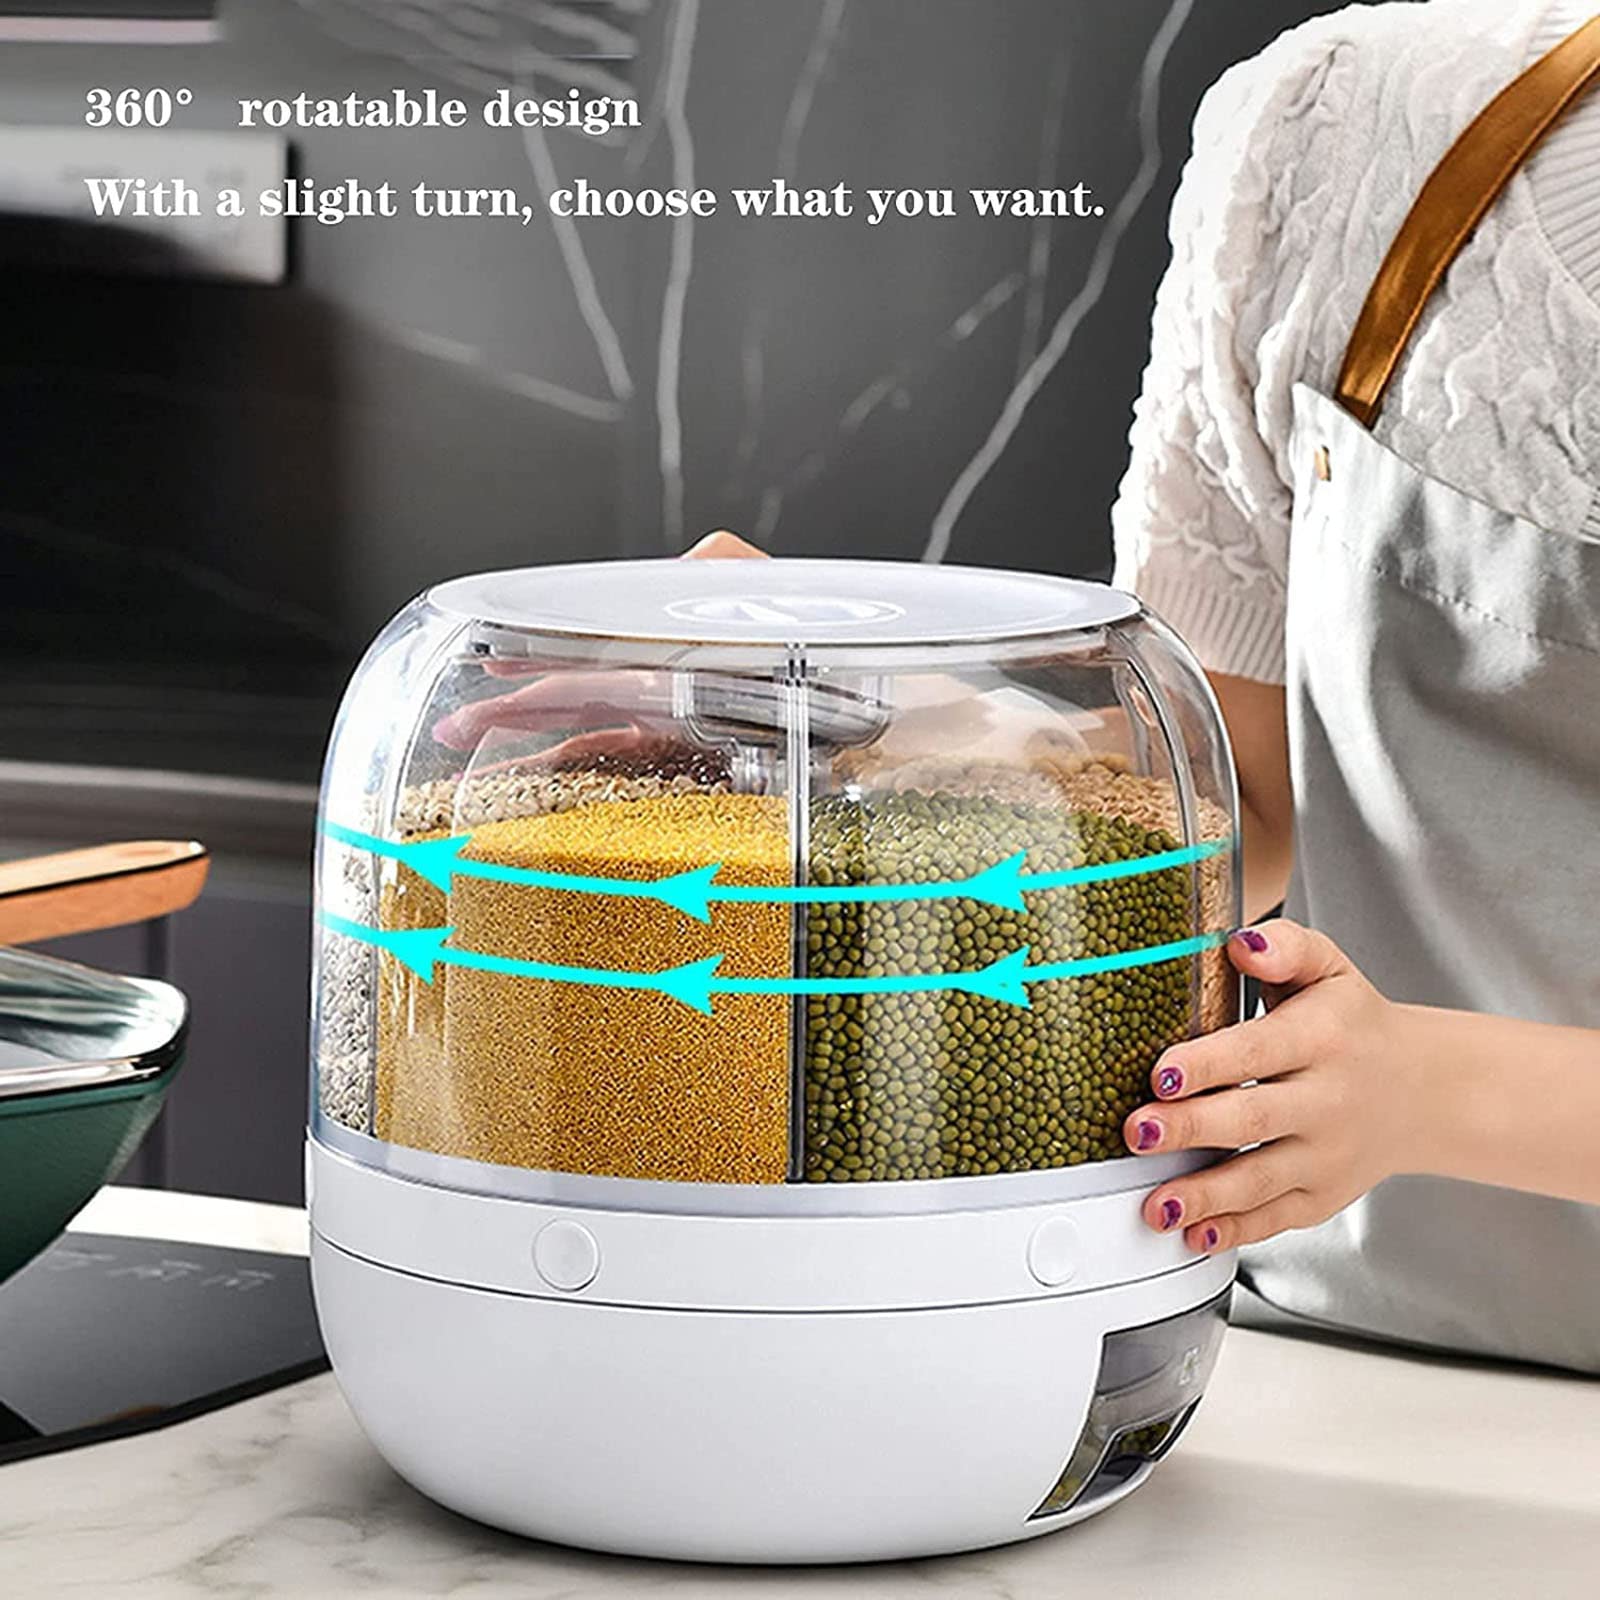 WJSP Cereal Dispenser Rice Bucket Dispenser 6 Grid 360° Rotating Rice Container Automatic Waterproof and Moisture-Proof Rice Storage Box for Kitchen, White